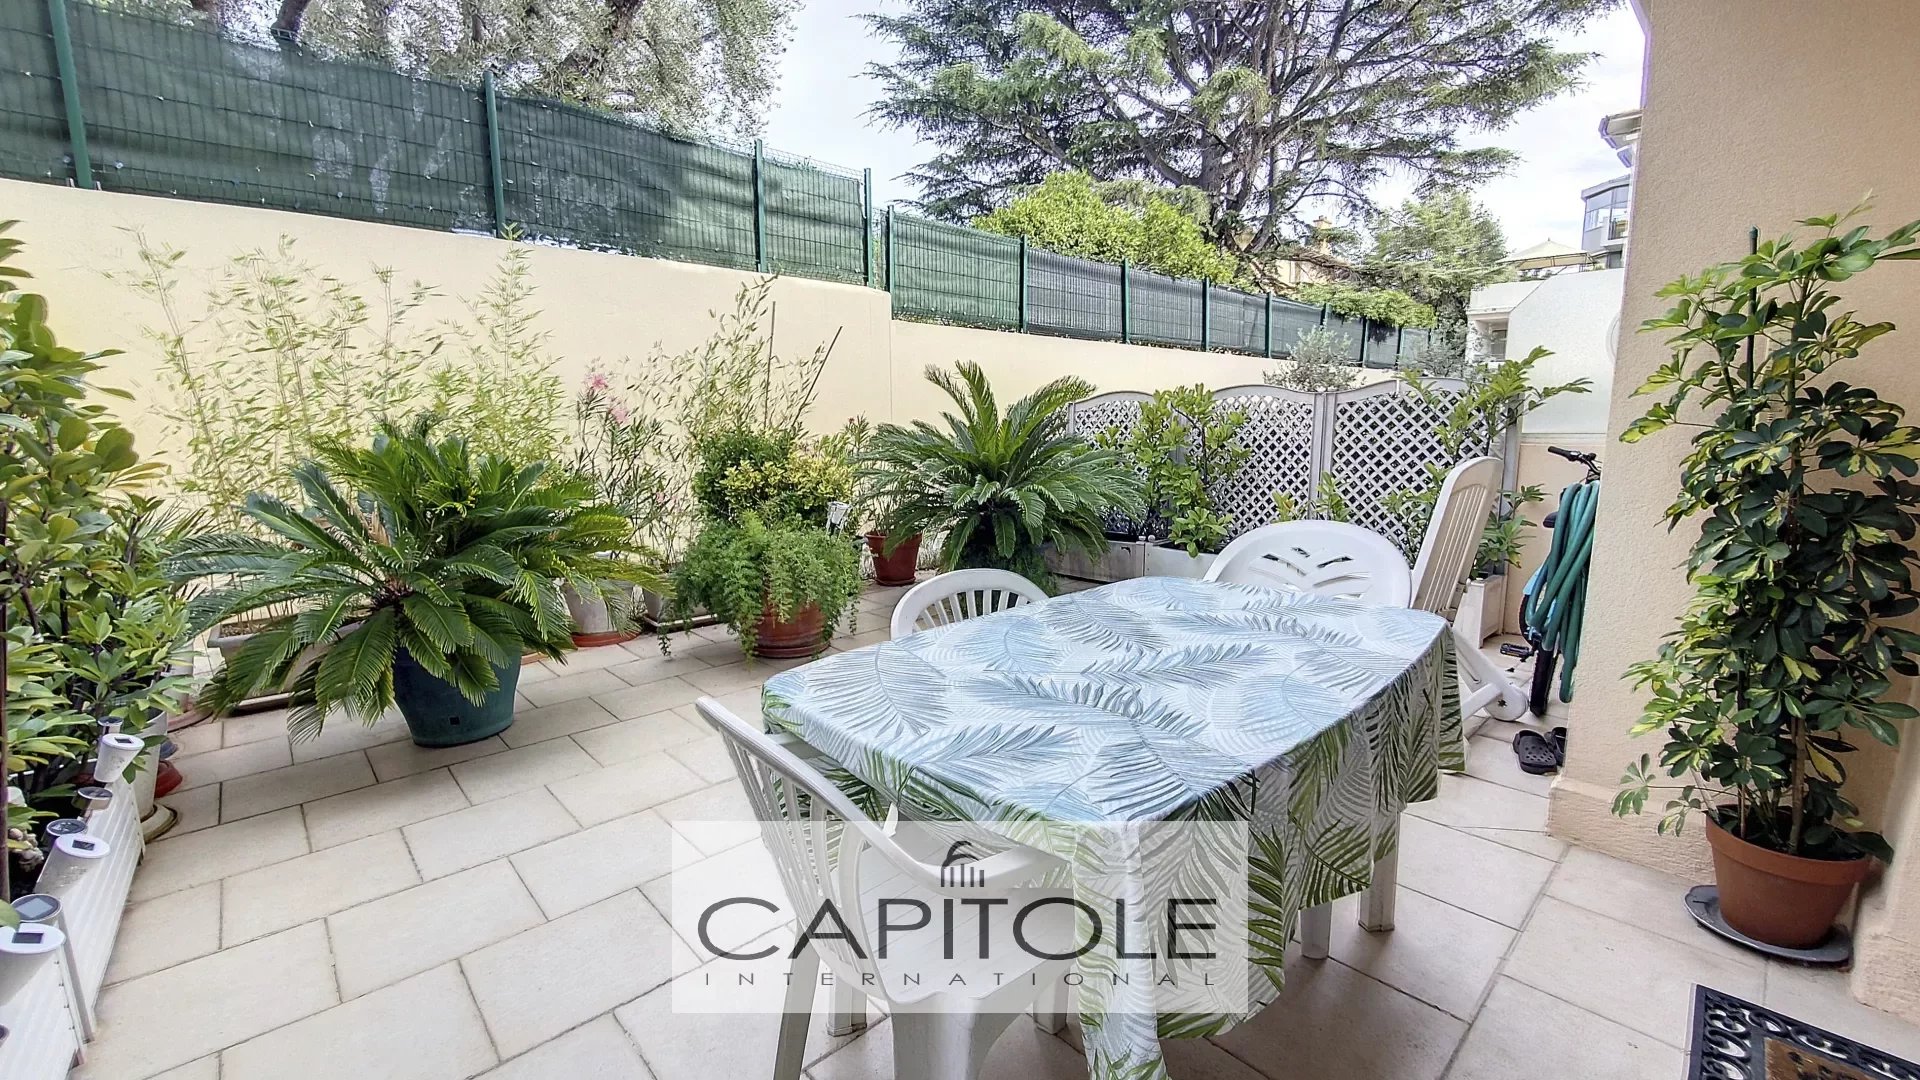 Cannes - Studio, 15 min from the sandy beaches and the train station